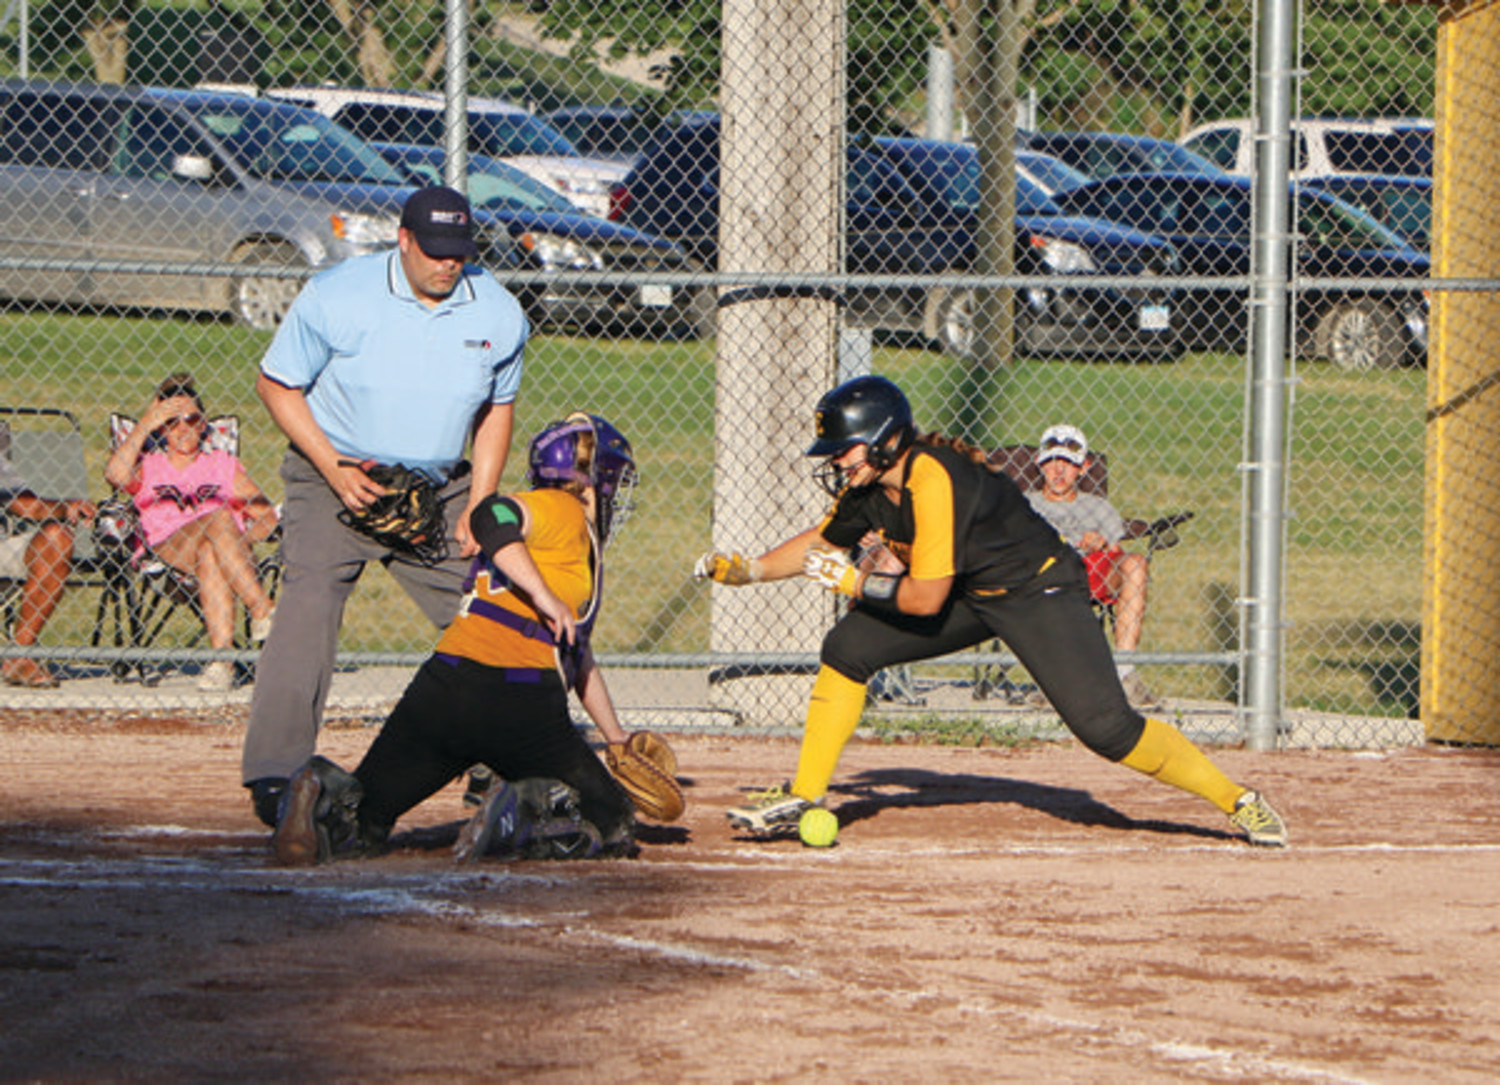 SAFE AT HOME - On Thursday, Emmetsburg’s Cheyanne Fries (right) prepares for a battle at home plate against West Bend-Mallard’s Anna Ackerman, but scores before the ball arrives. The Lady E-Hawks would get the win, 11-1.                        -- Joseph Schany photo